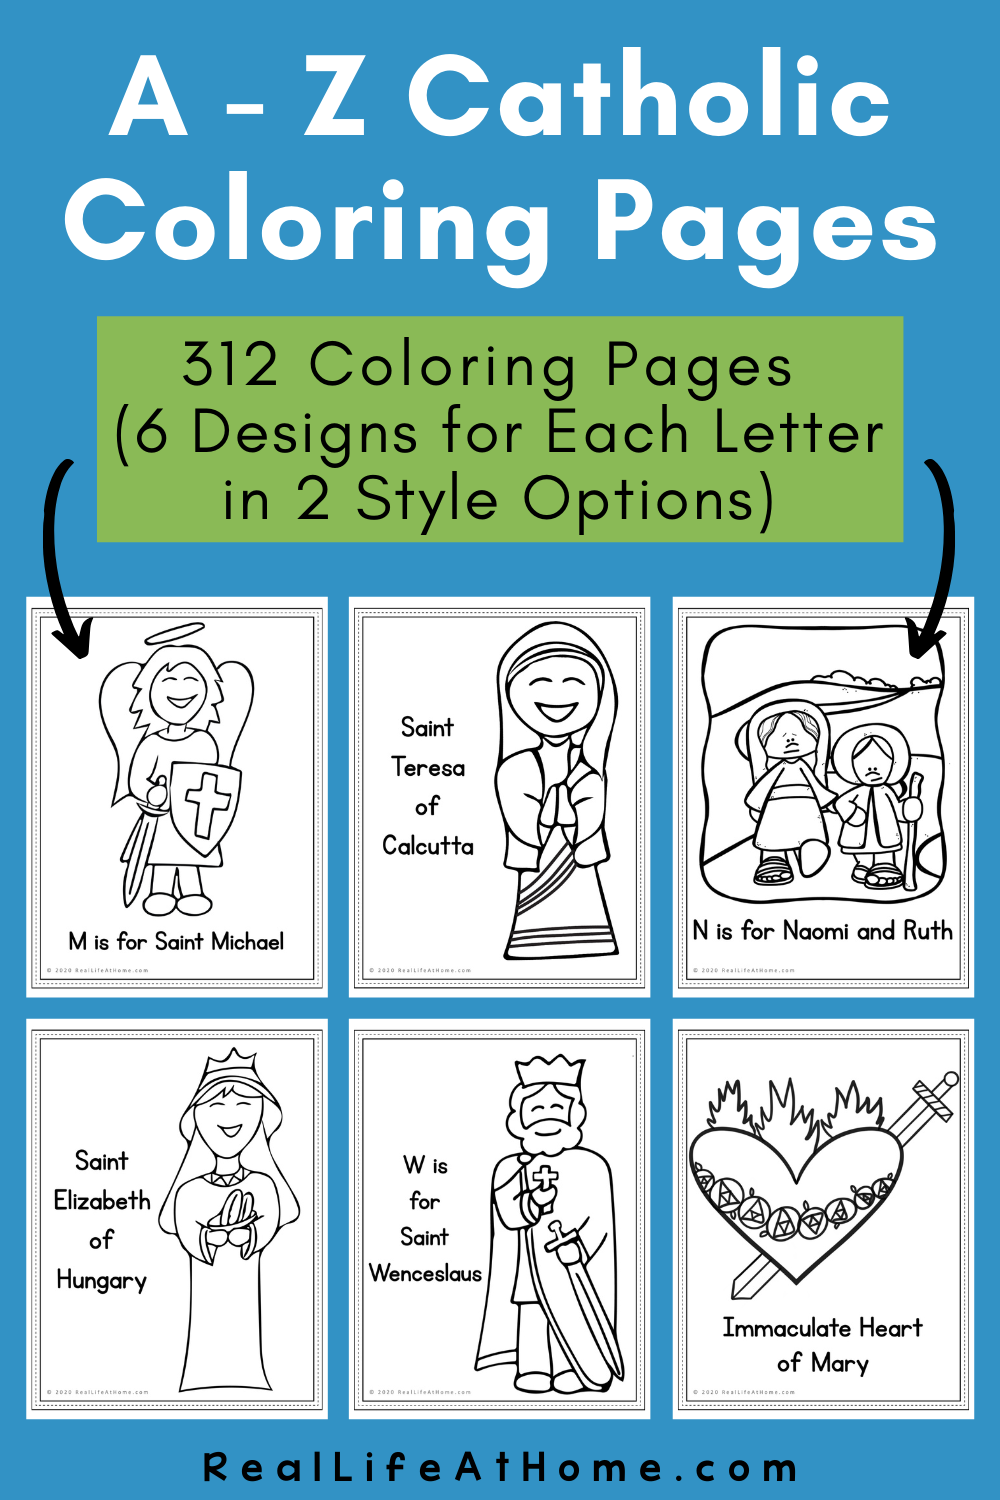 A - Z Catholic Coloring Pages (312 Coloring Pages)